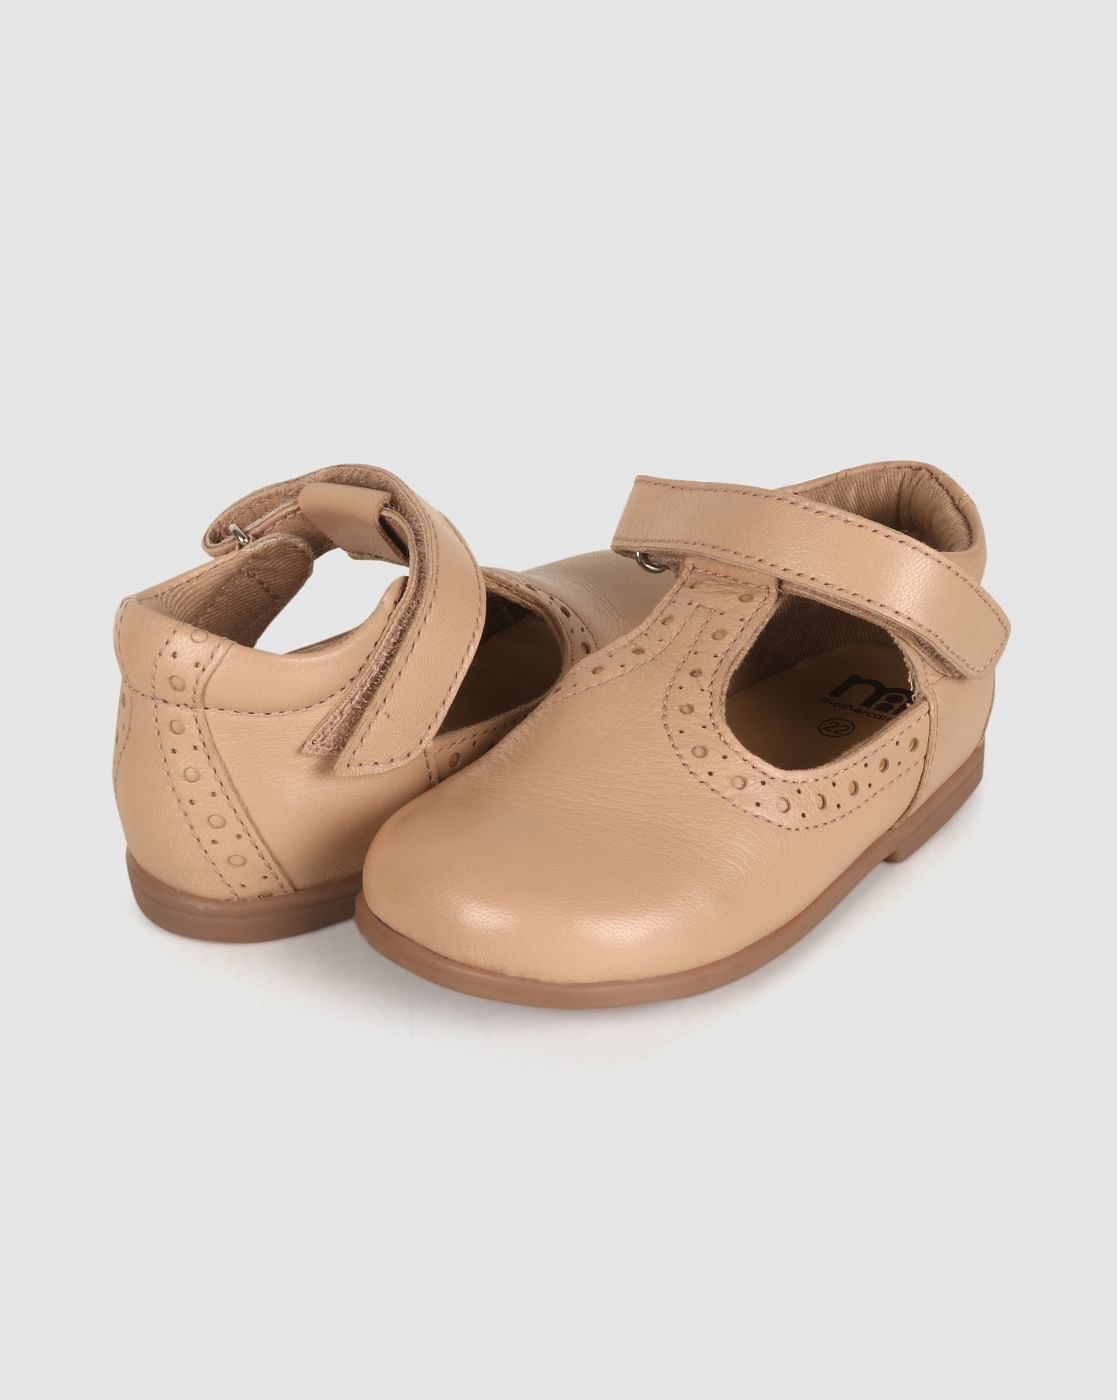 Mothercare | Girls First Walker Shoes Cut Out Design - Ivory 0